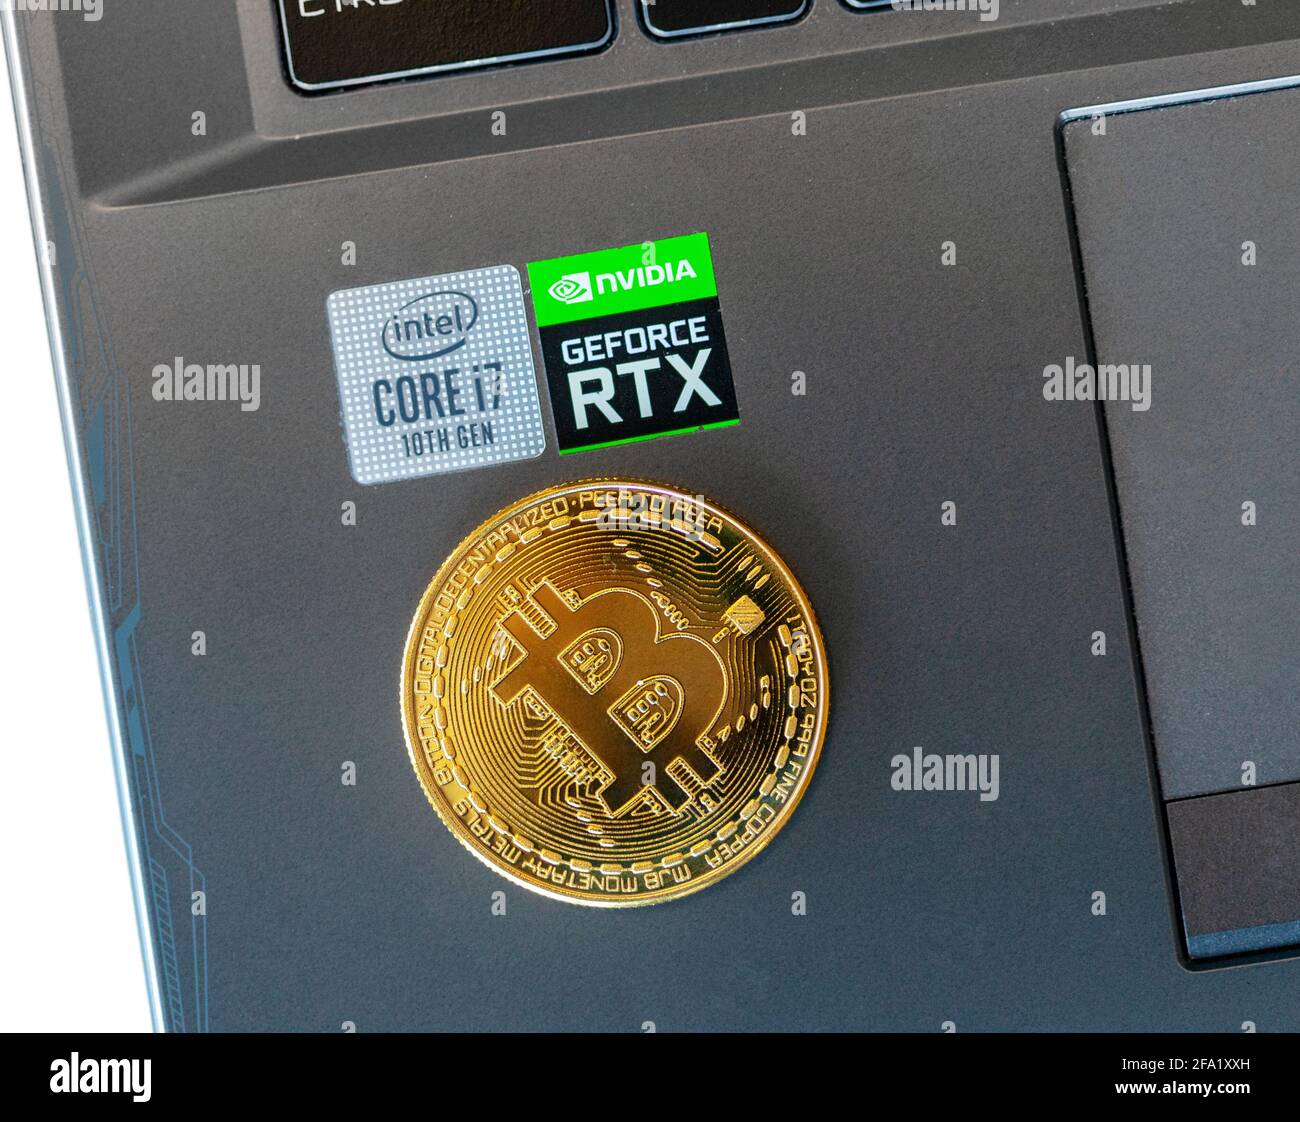 Bologna, Italy - April 22, 2021: Bitcoin mining concept with laptop with  Intel cpu and GPU Nvidia video card. Bitcoin is currently being mined with  As Stock Photo - Alamy